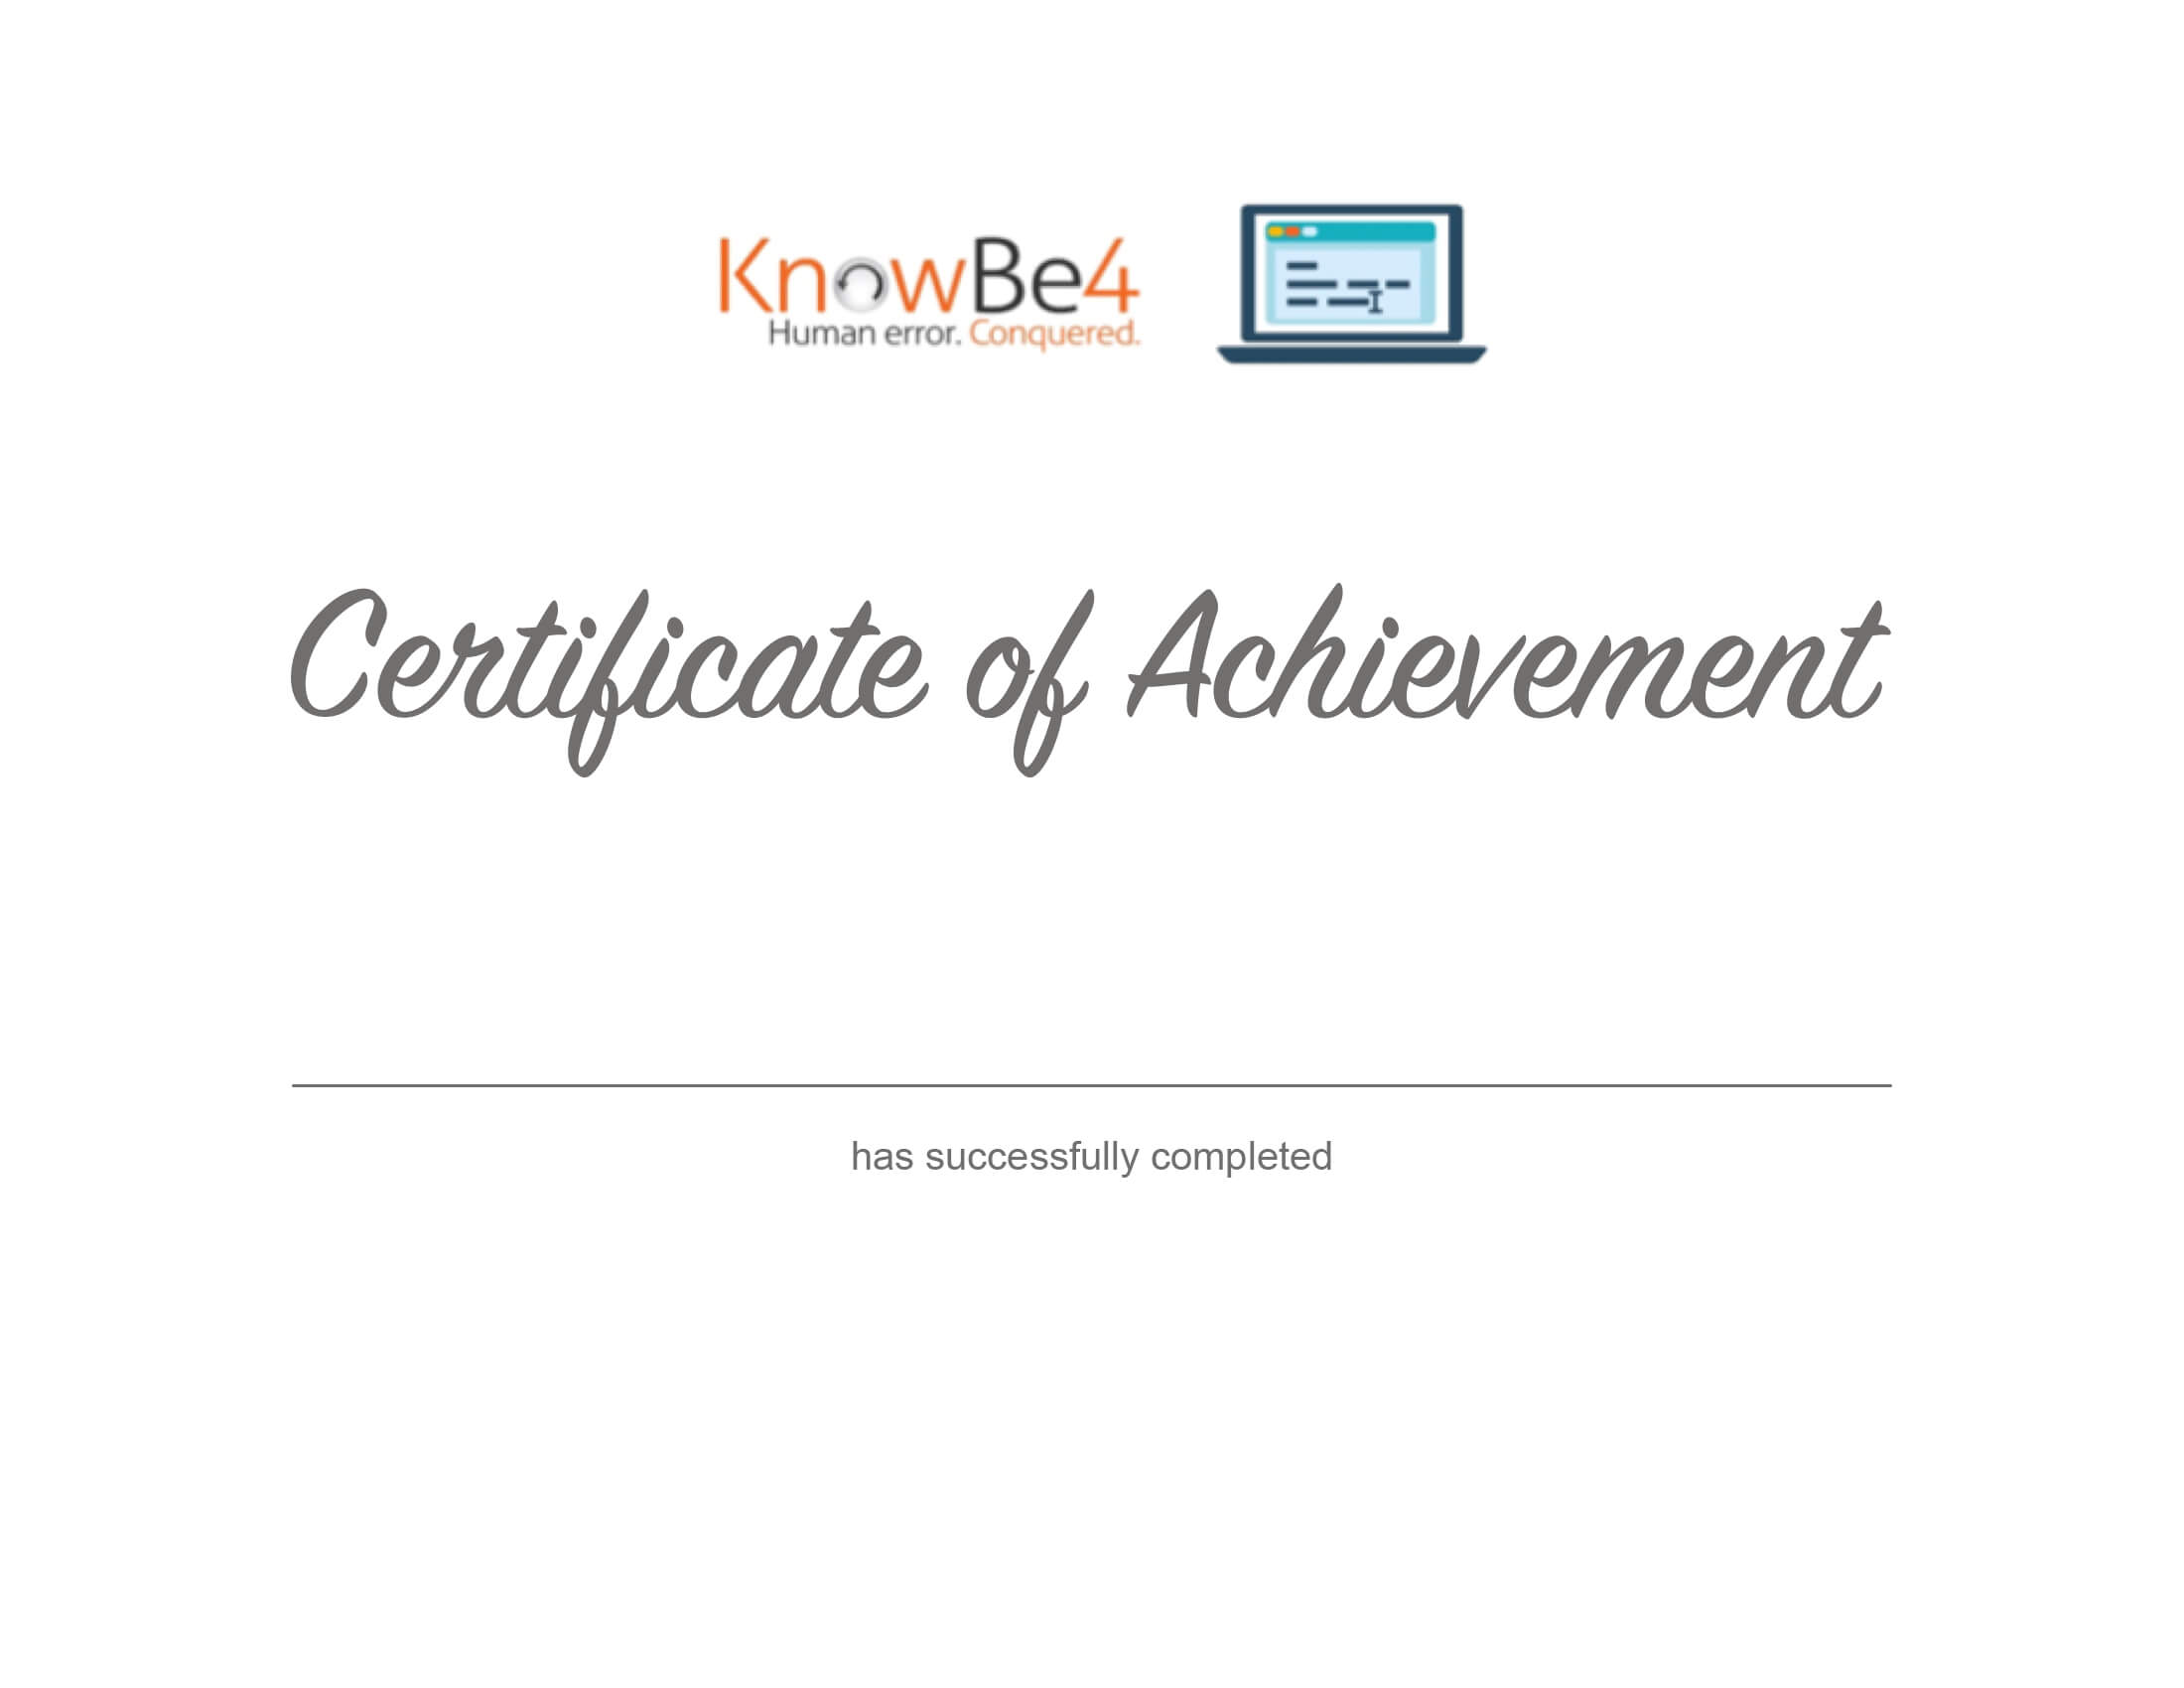 How Do I Customize My Users' Training Certificates For No Certificate Templates Could Be Found